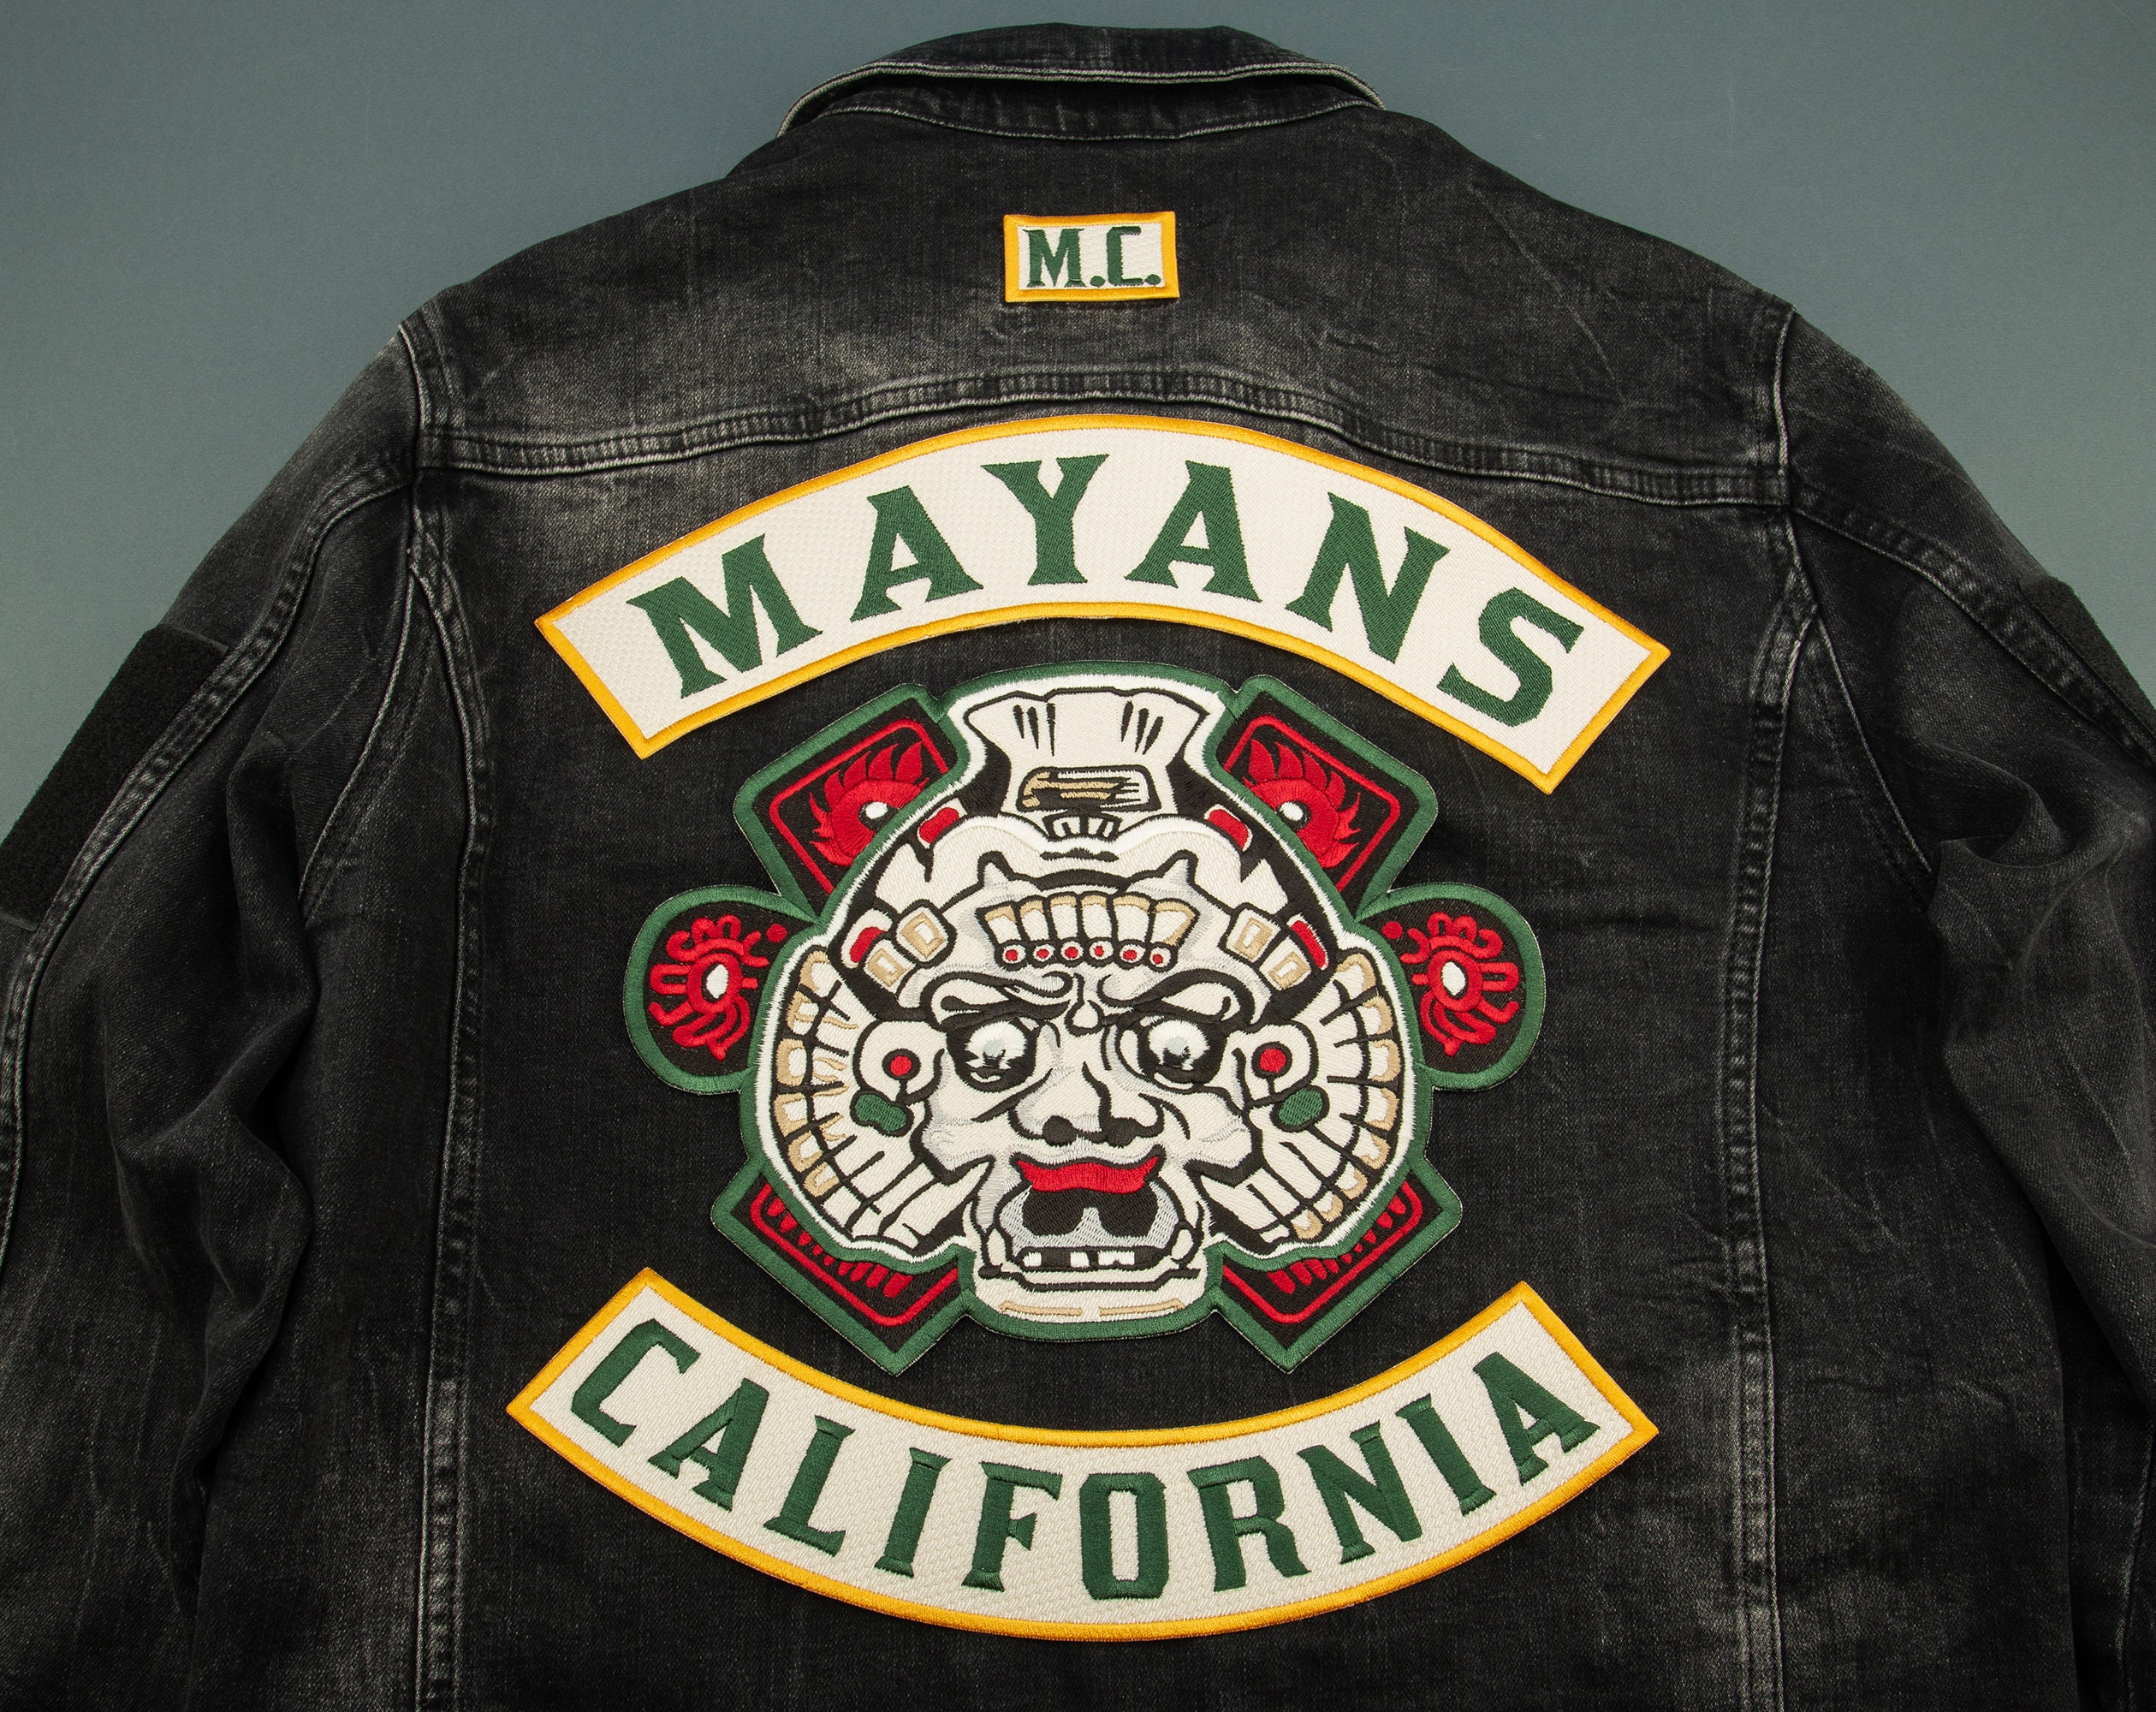 MAYANS MC FULL BACK EMBROIDERED PATCH SET 7 PIECE BLACK